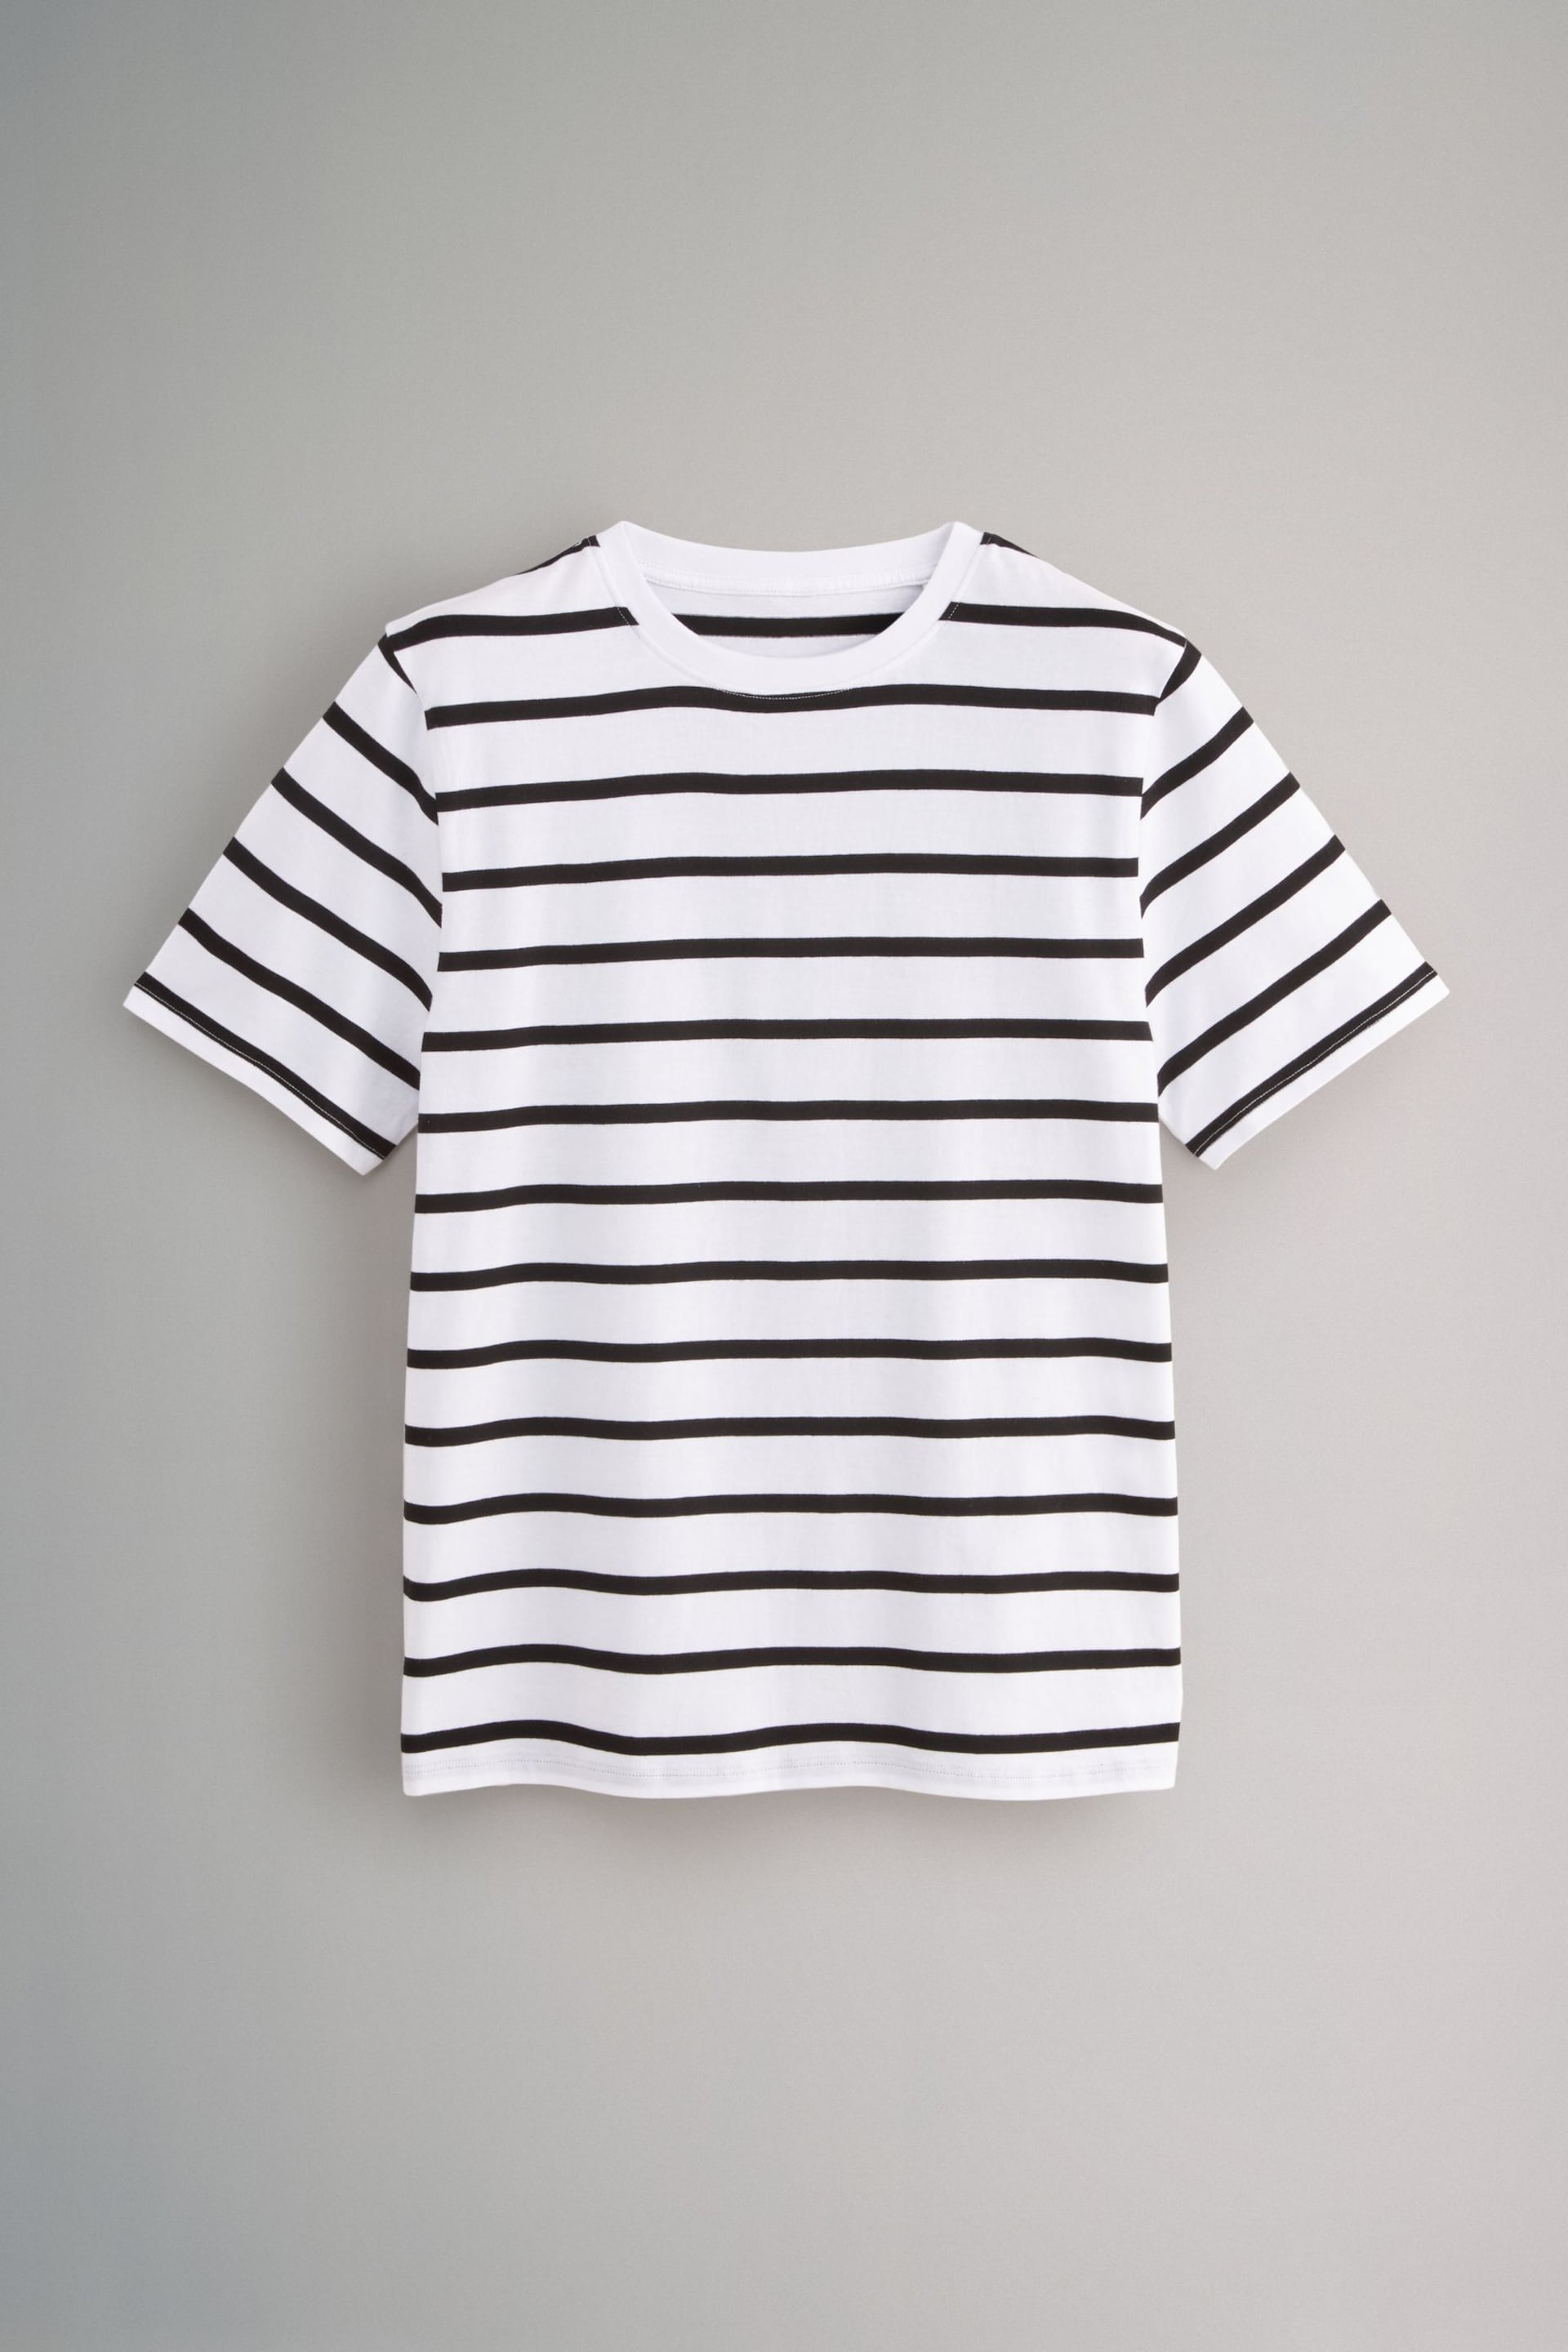 The Set Black/Grey/White/Stripe 4 Pack Relaxed Short Sleeve T-Shirts - Image 8 of 11